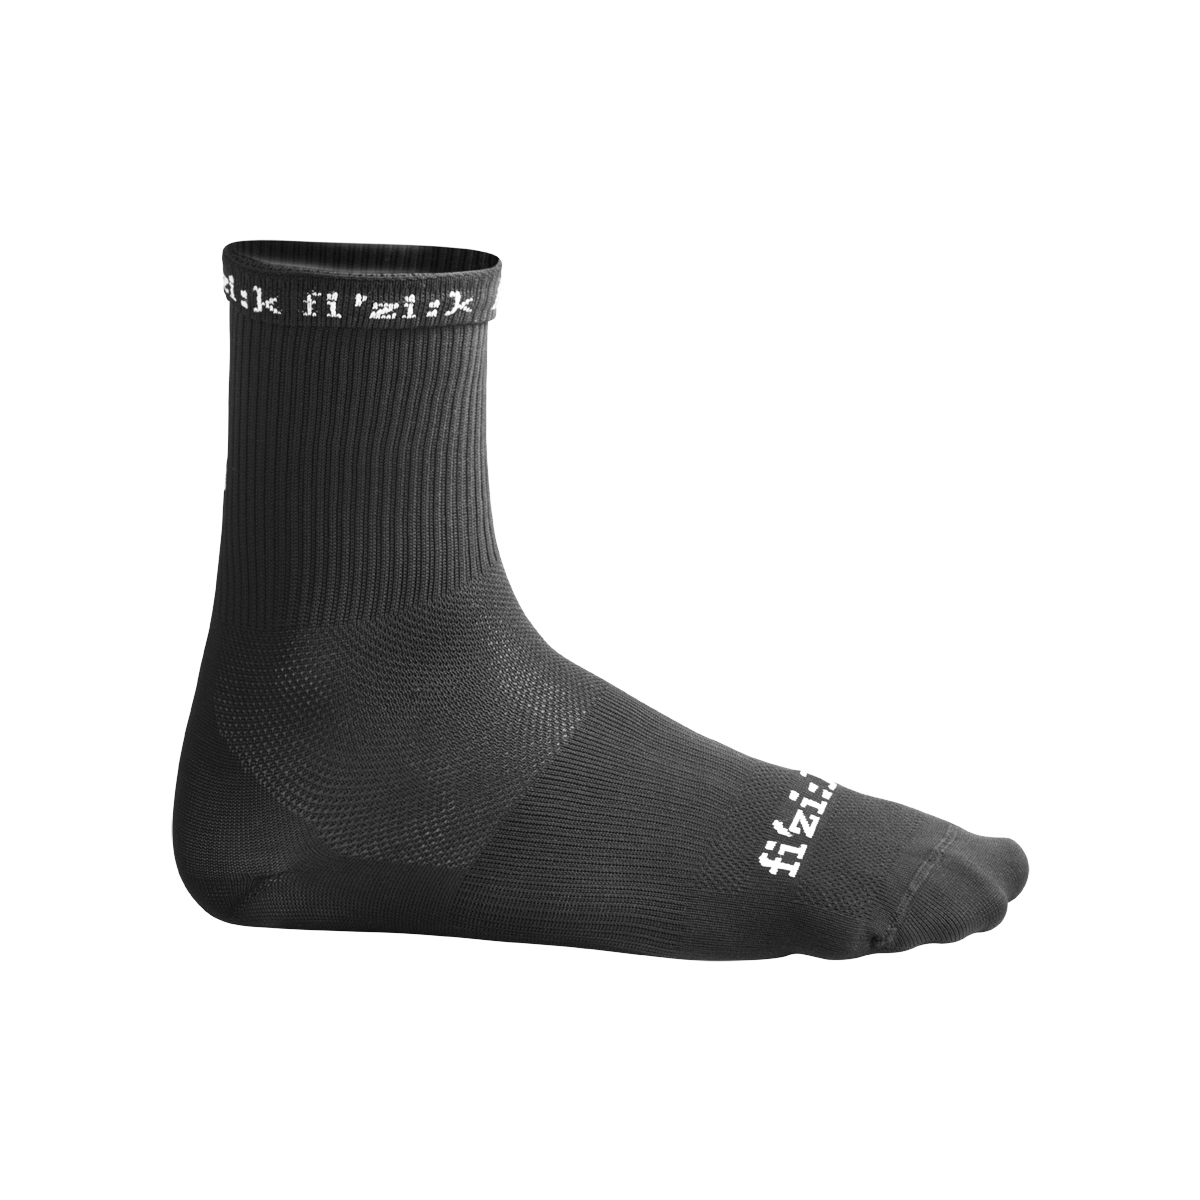 Fizik Summer Cycling Socks - Choice 3 colours - Blend of lycra and Q-Skin microfiber Anti-bacterial treatement, quickdry materials Anatomic support and compression zone.